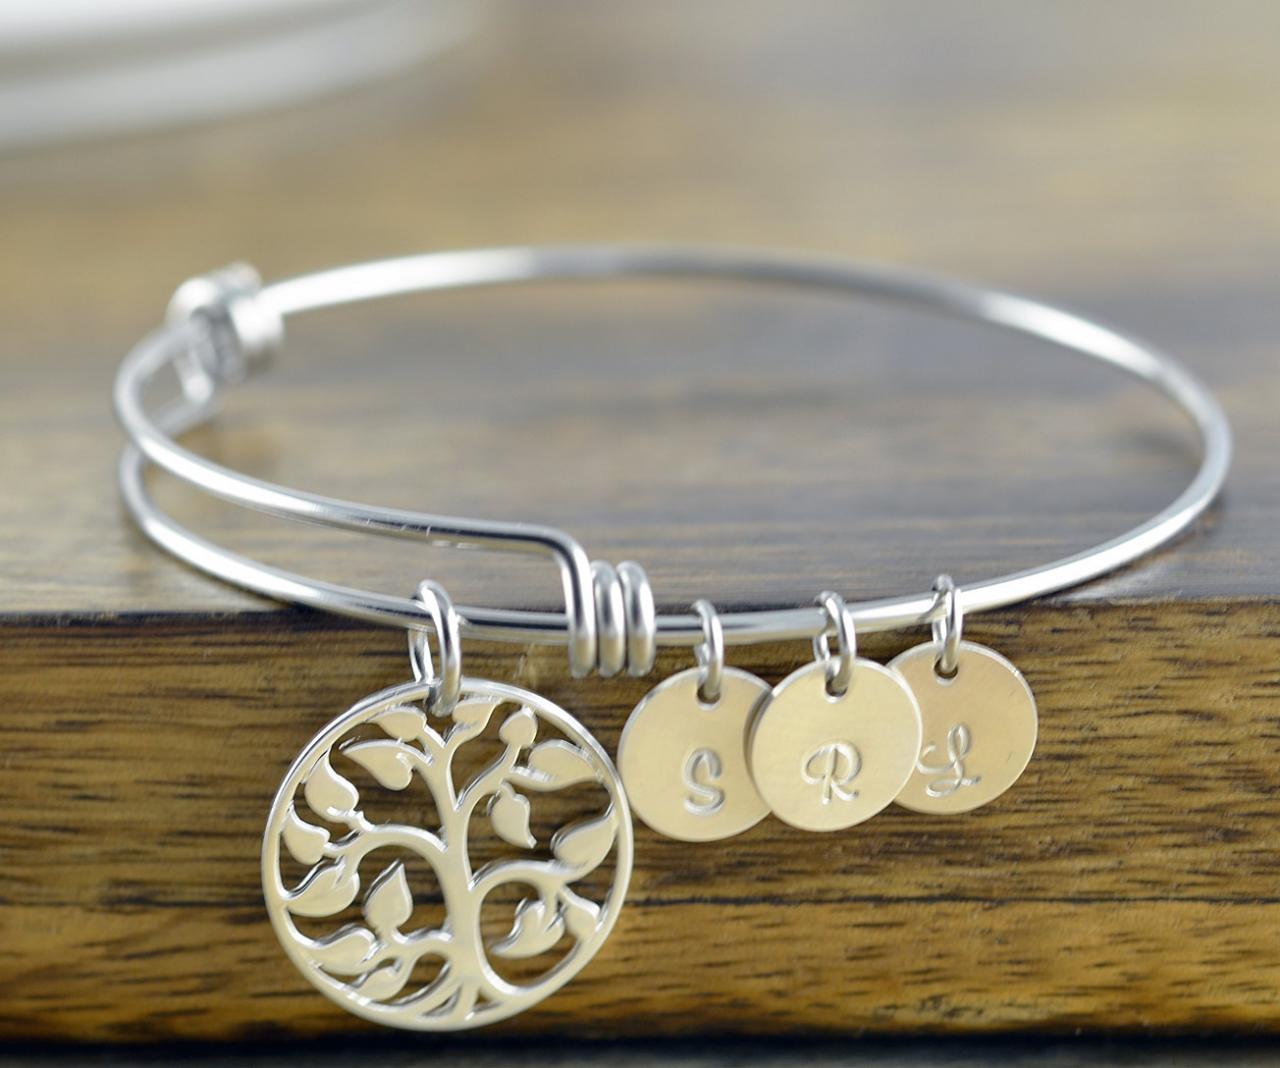 Silver Family Tree Bangle Bracelet - Tree Of Life Bracelet - Family Tree Jewelry - Grandmother Gift - Gifts For Mom - Mom Gift